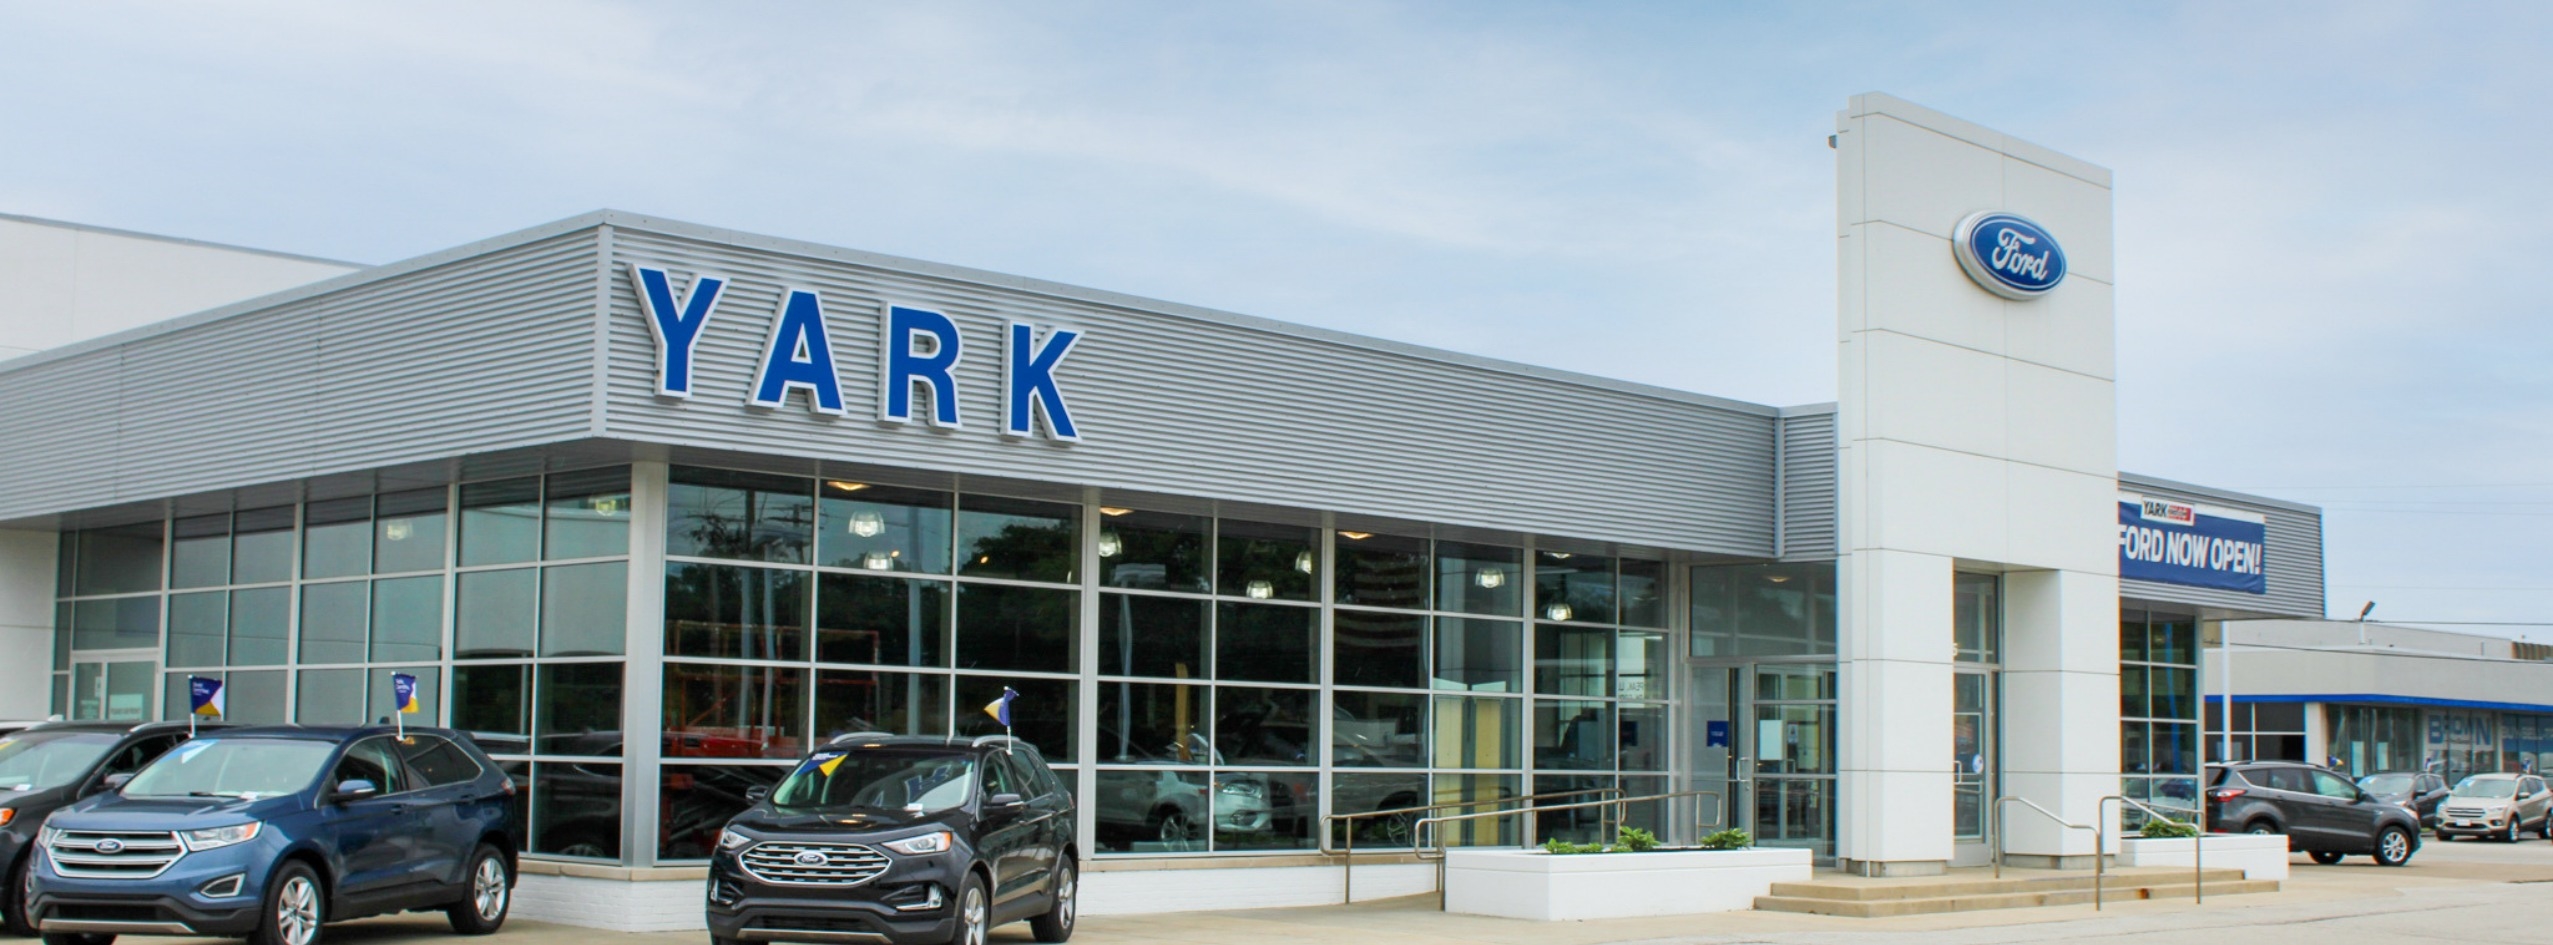 Yark Ford Exterior View - Ford dealership located in Toledo, OH